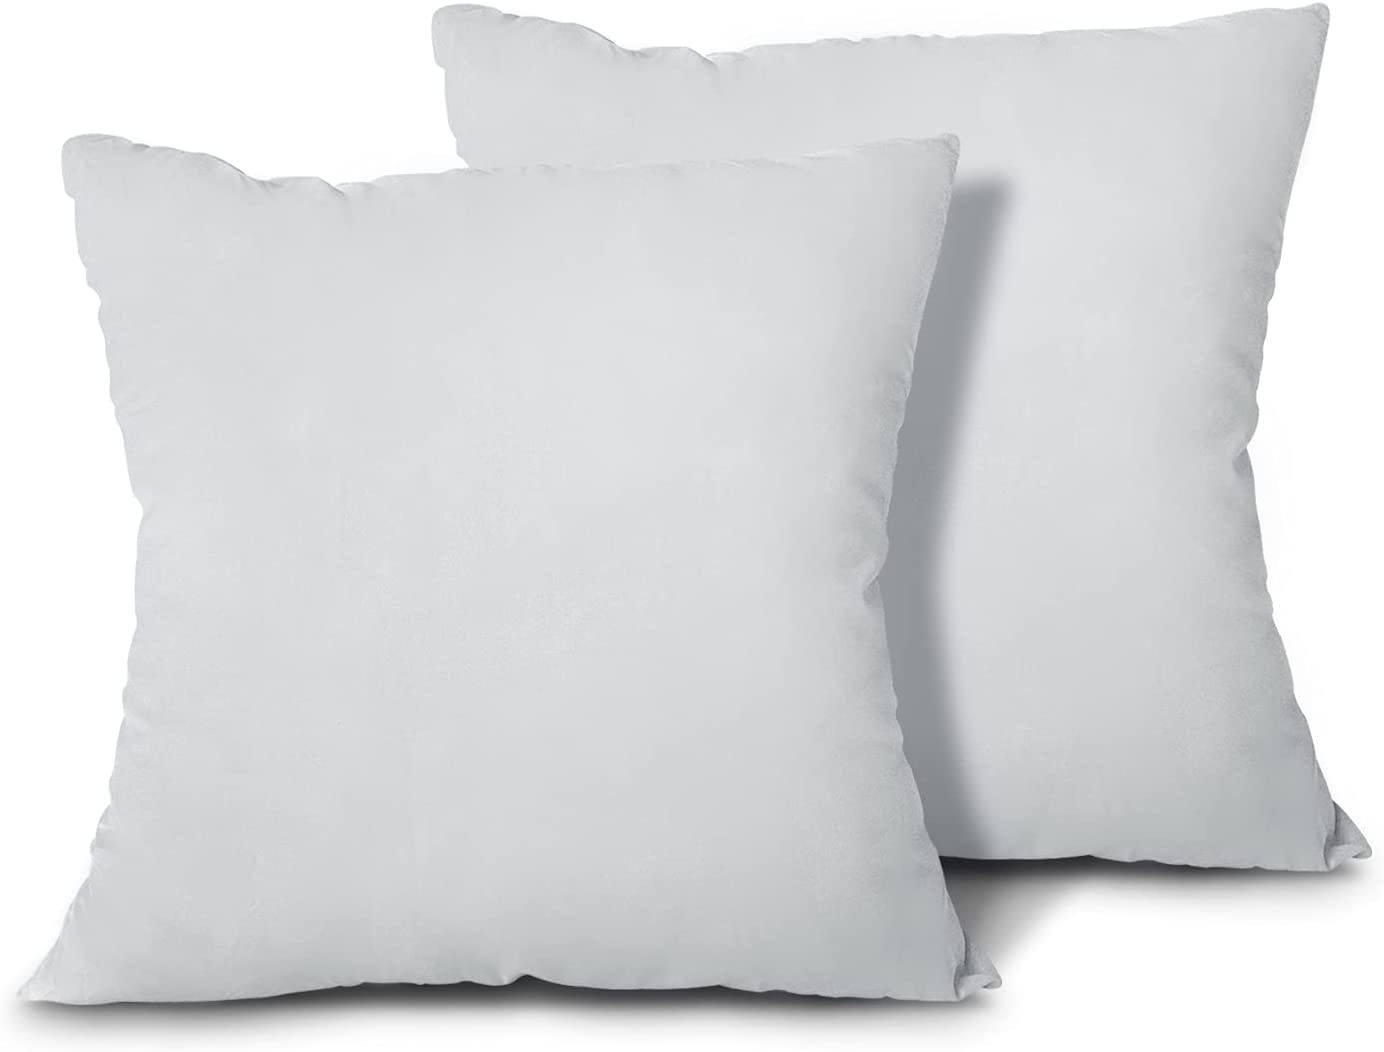 EDOW Throw Pillow Inserts, Set of 2 Lightweight Down Alternative Polyester Pillow, Couch Cushion, Sham Stuffer, Machine Washable